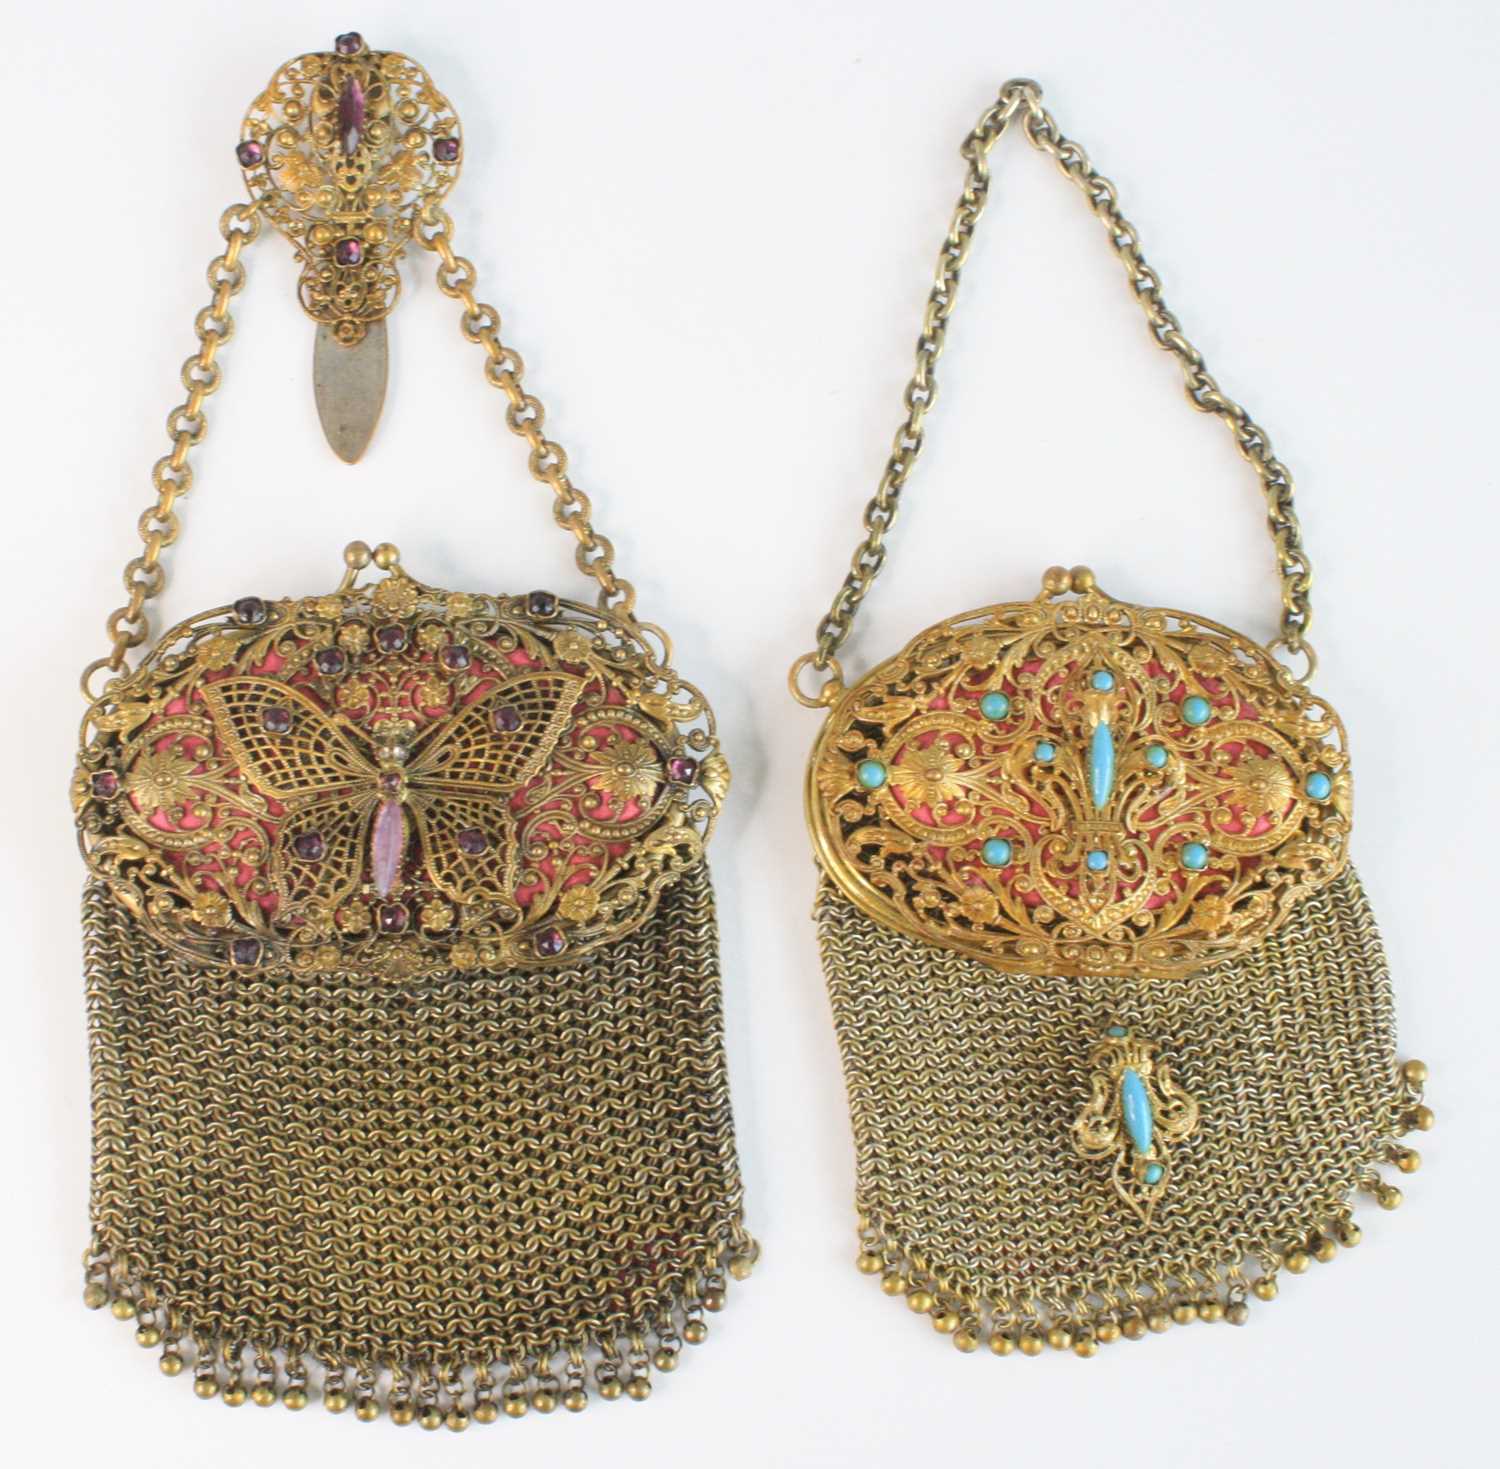 A late 19th century French silvered cast brass chatelaine / vanity purse, the top of oval form